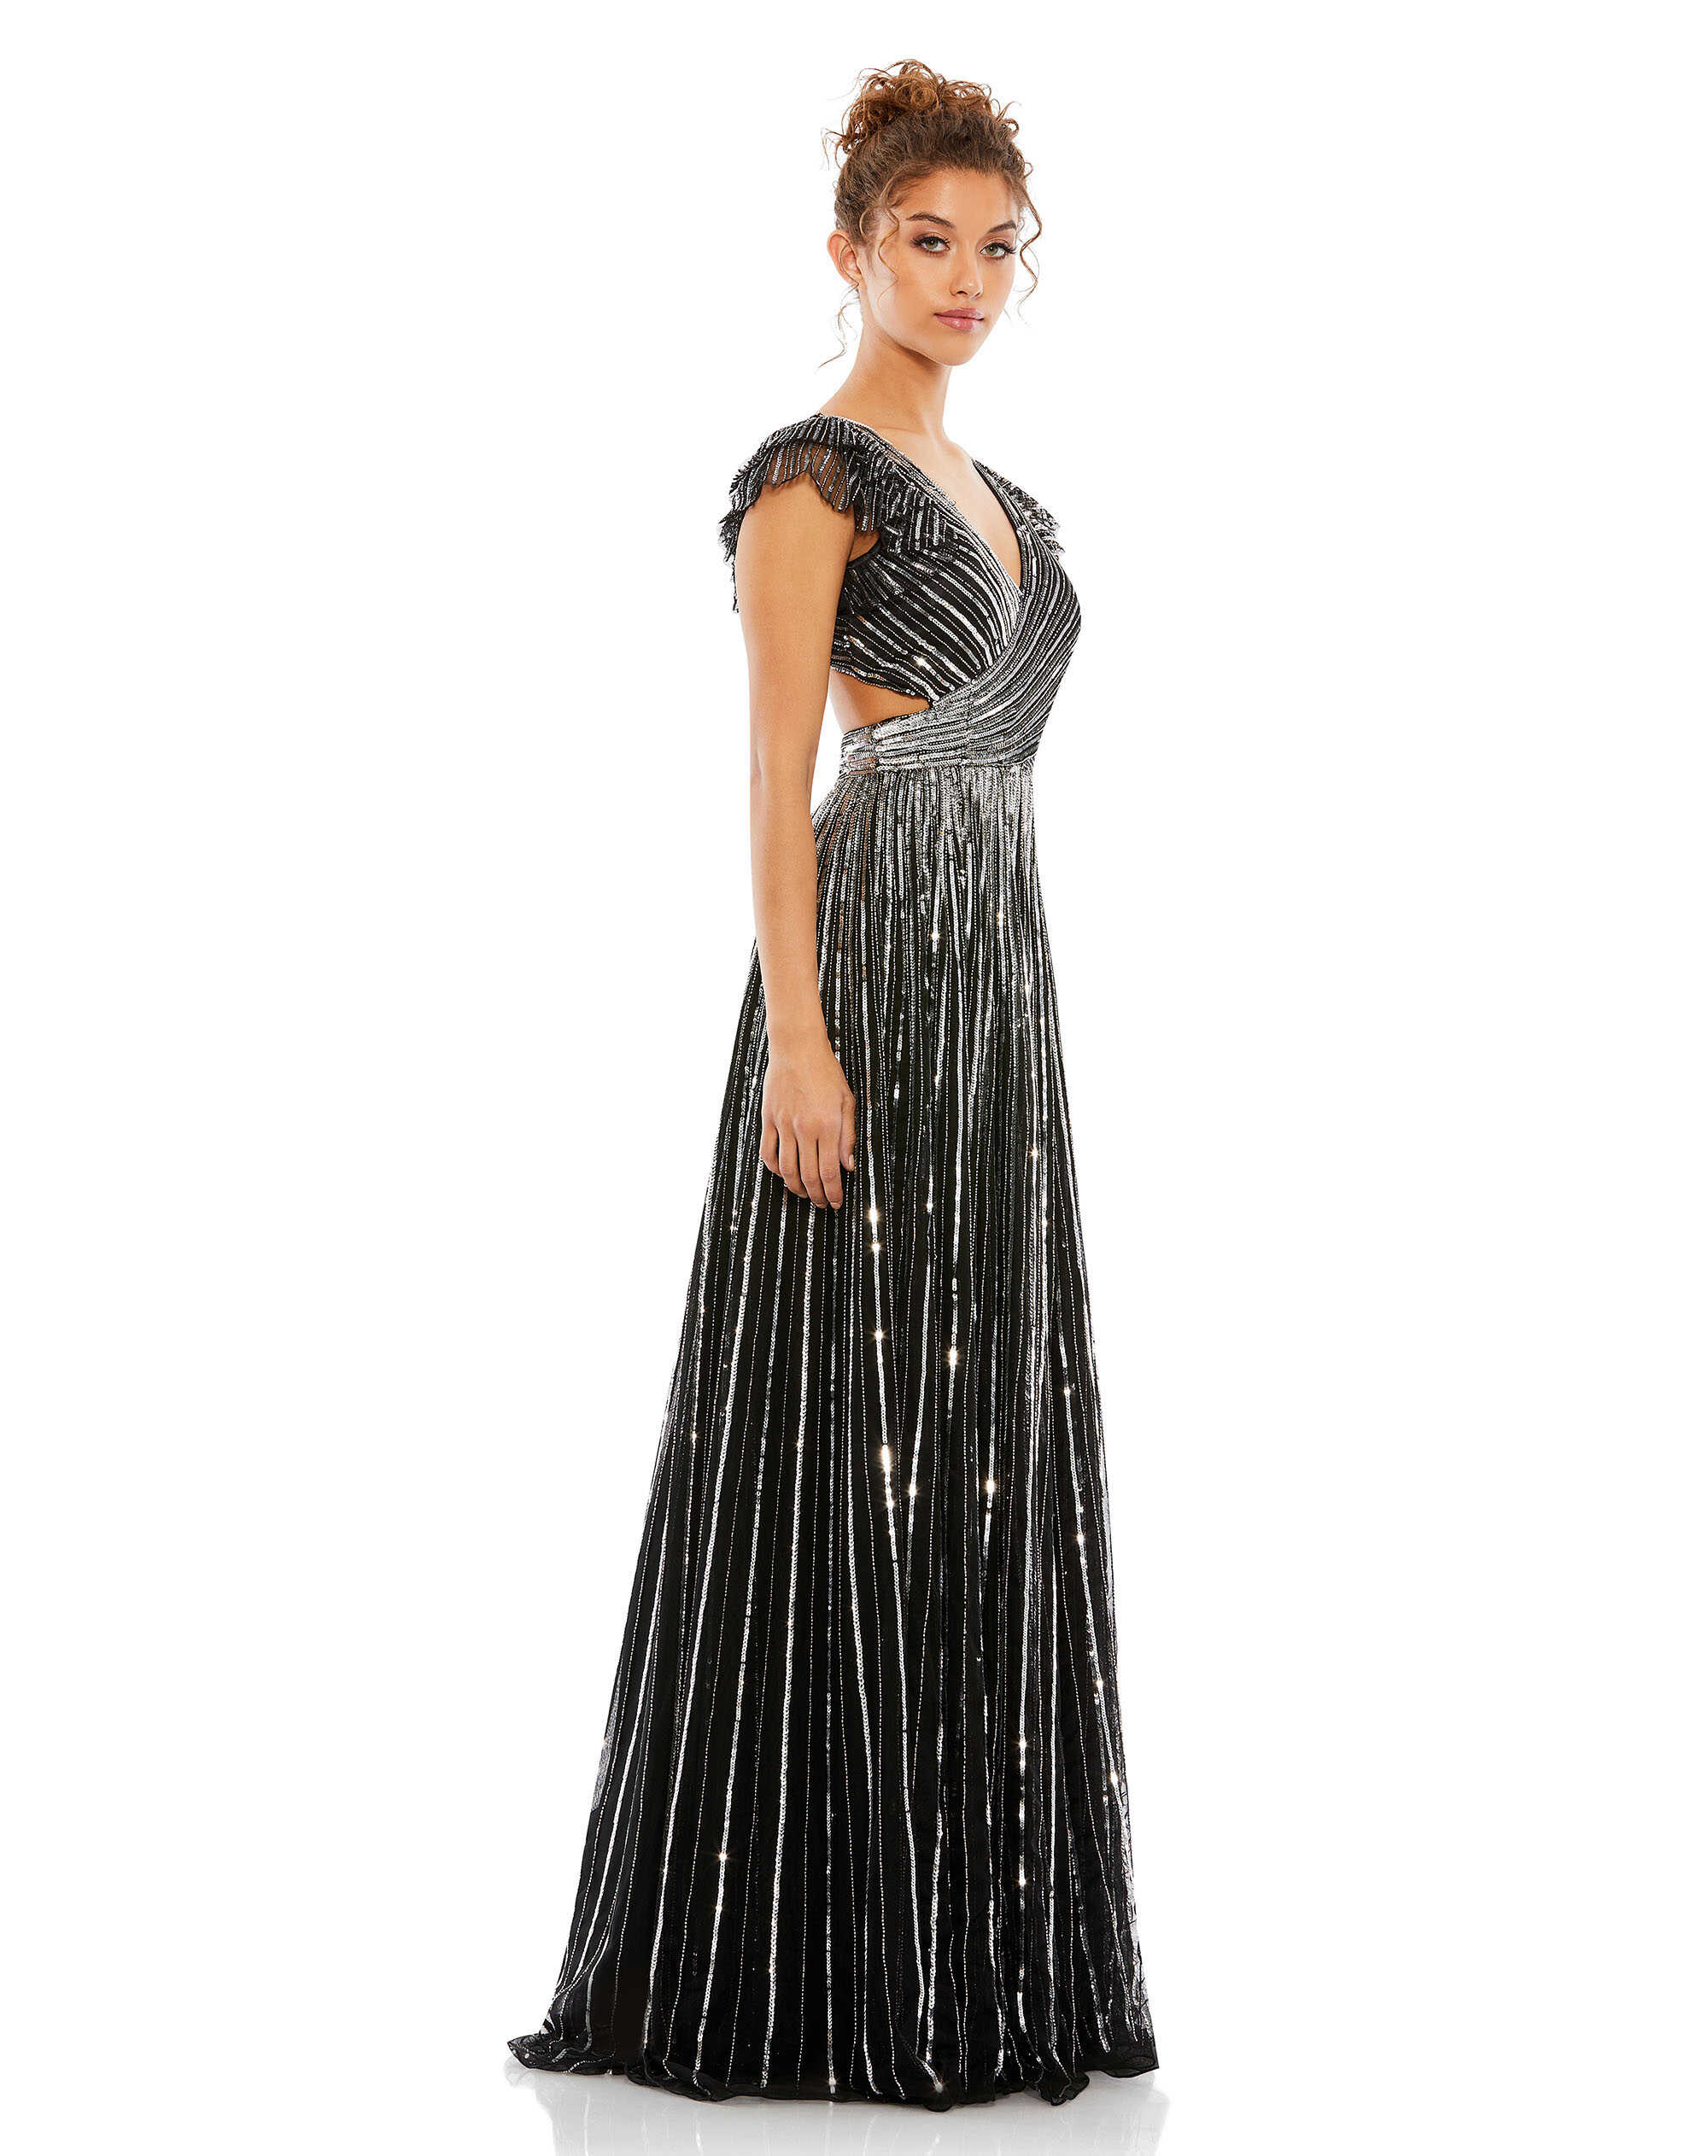 Sequined Cut Out Ruffled Cap Sleeve Lace Up Gown